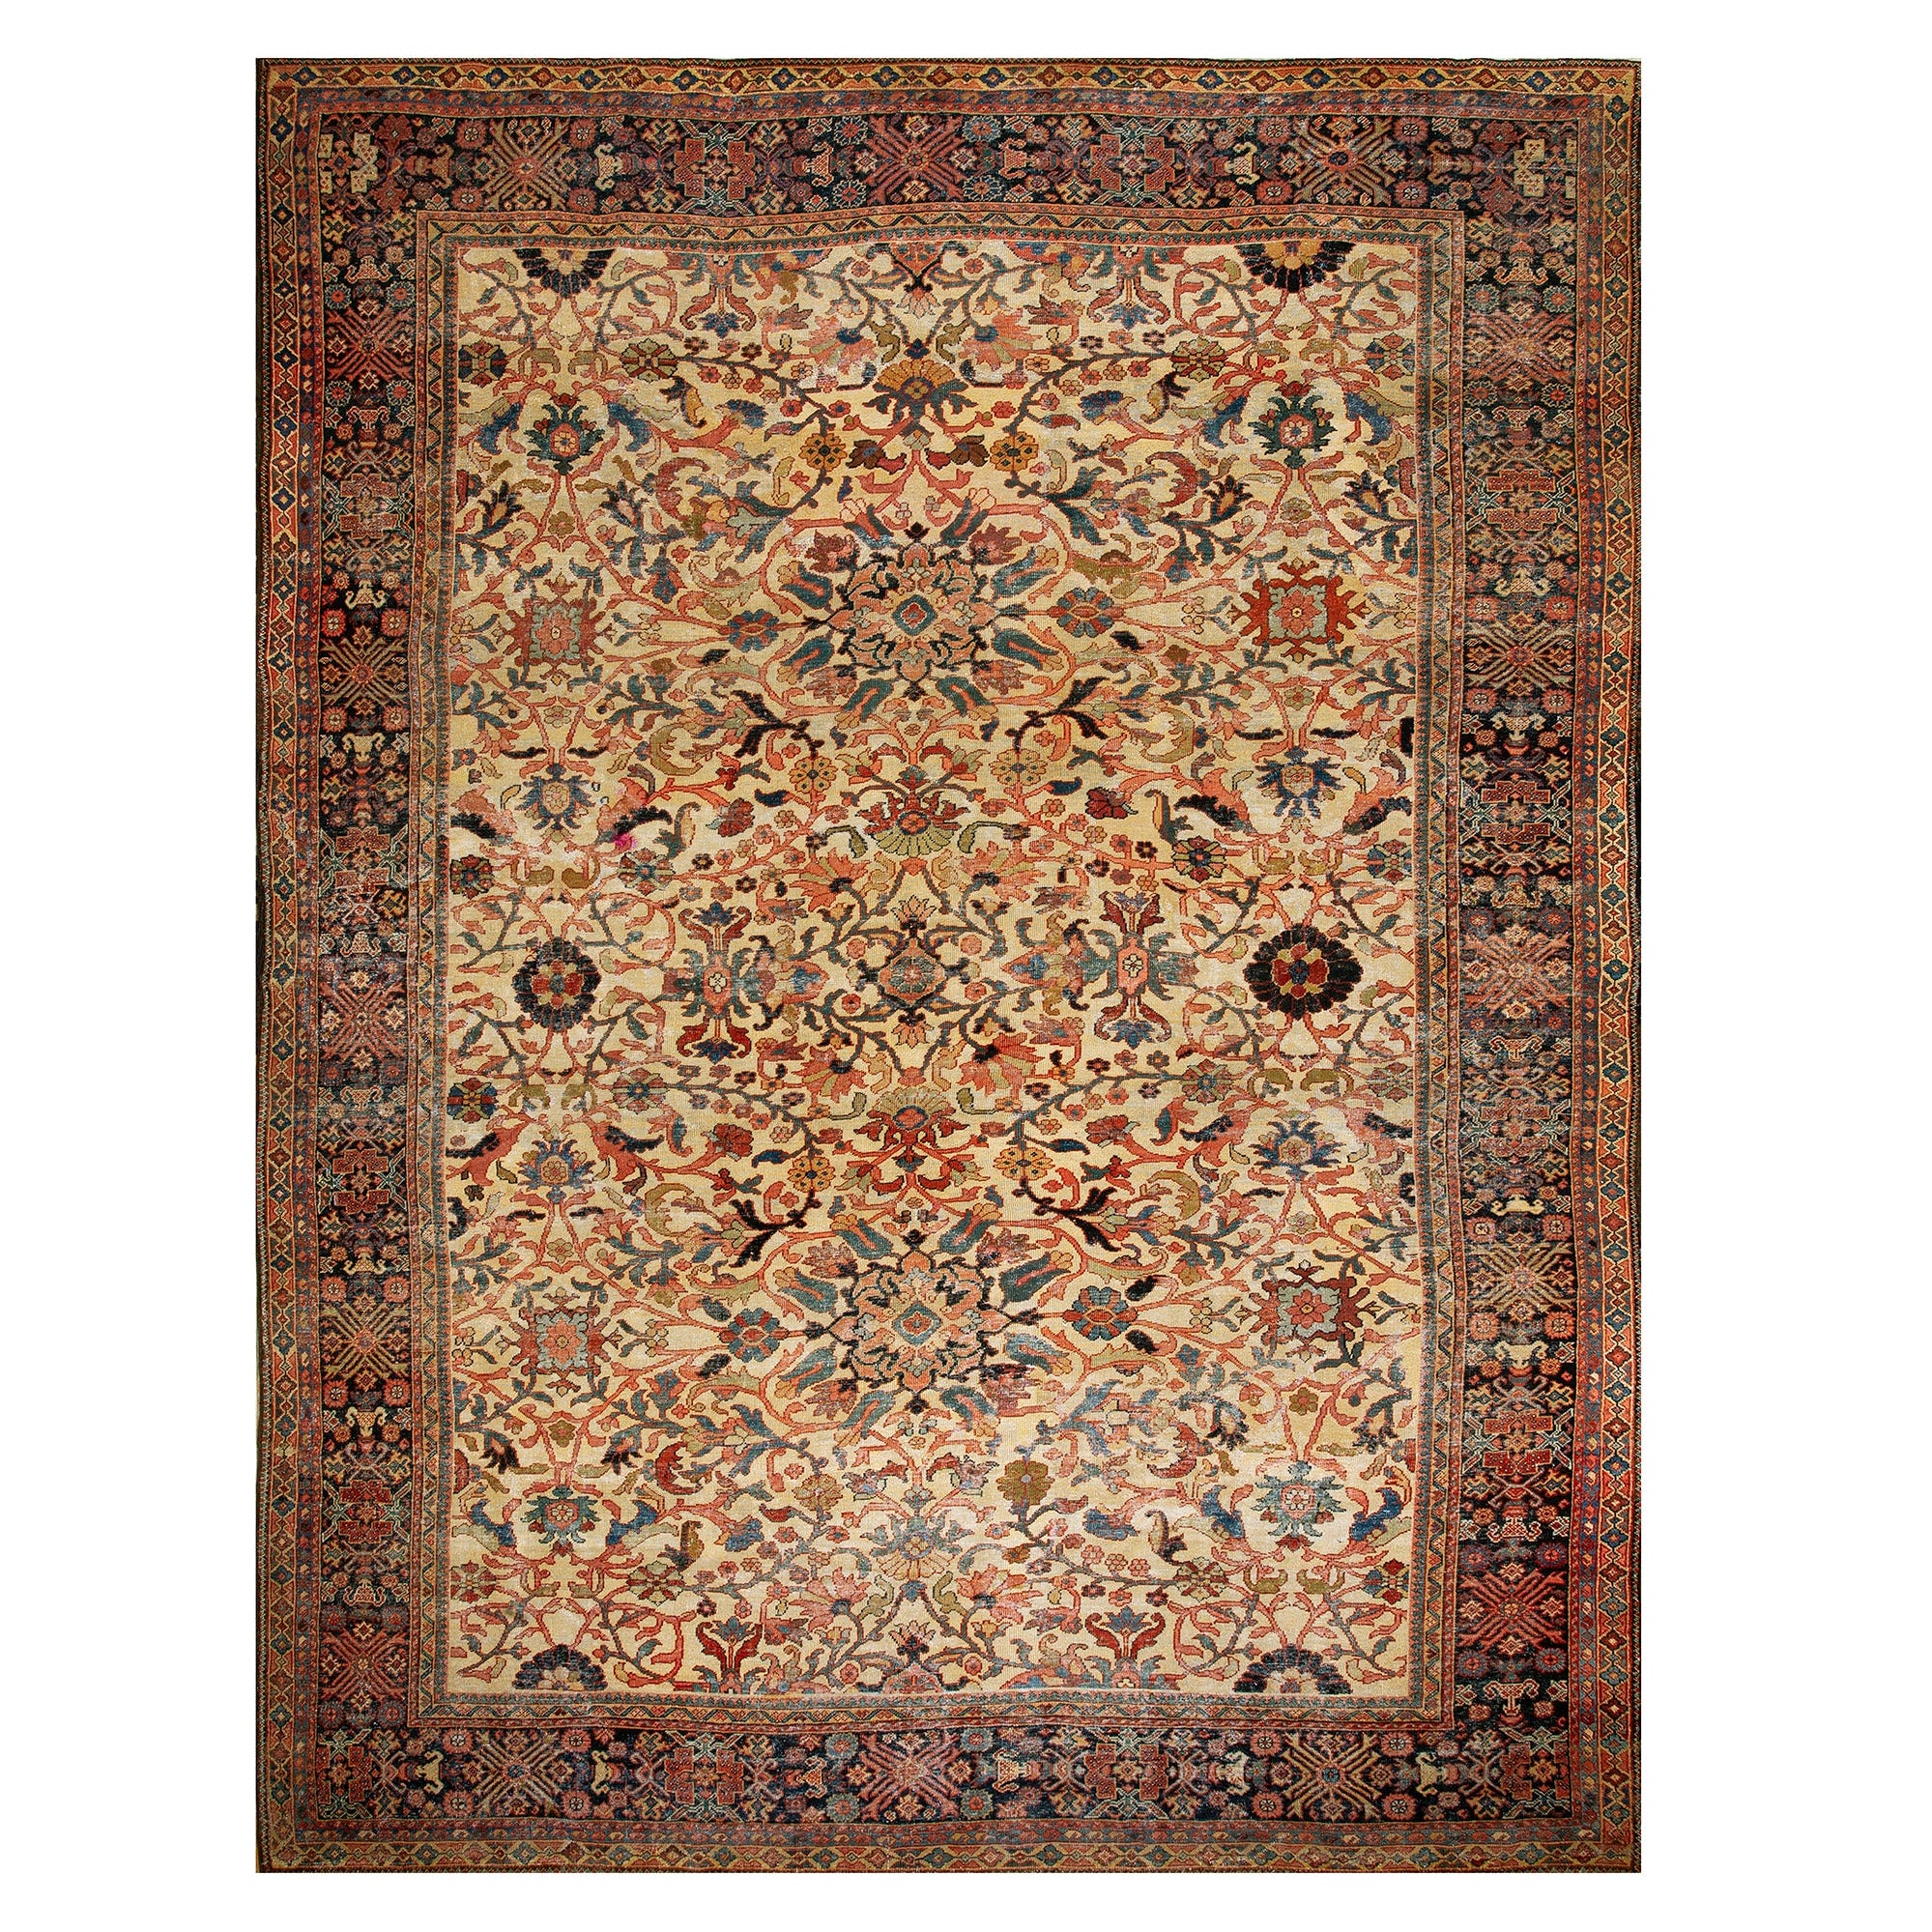 Late 19th Century Persian Sultanabad Carpet ( 10'6'' x 14' - 320 x 425 )